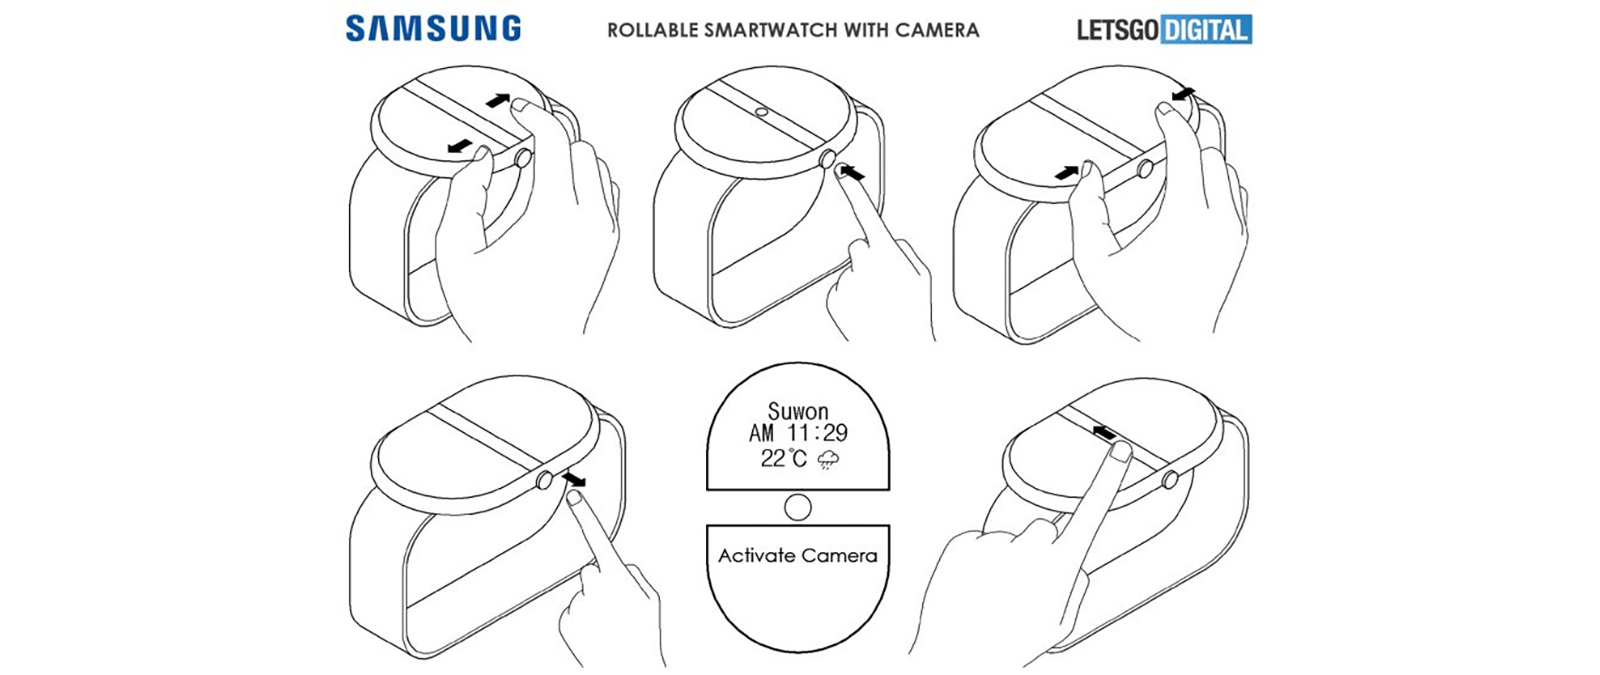 A Samsung smartwatch patent showing a watch with an expandable display.